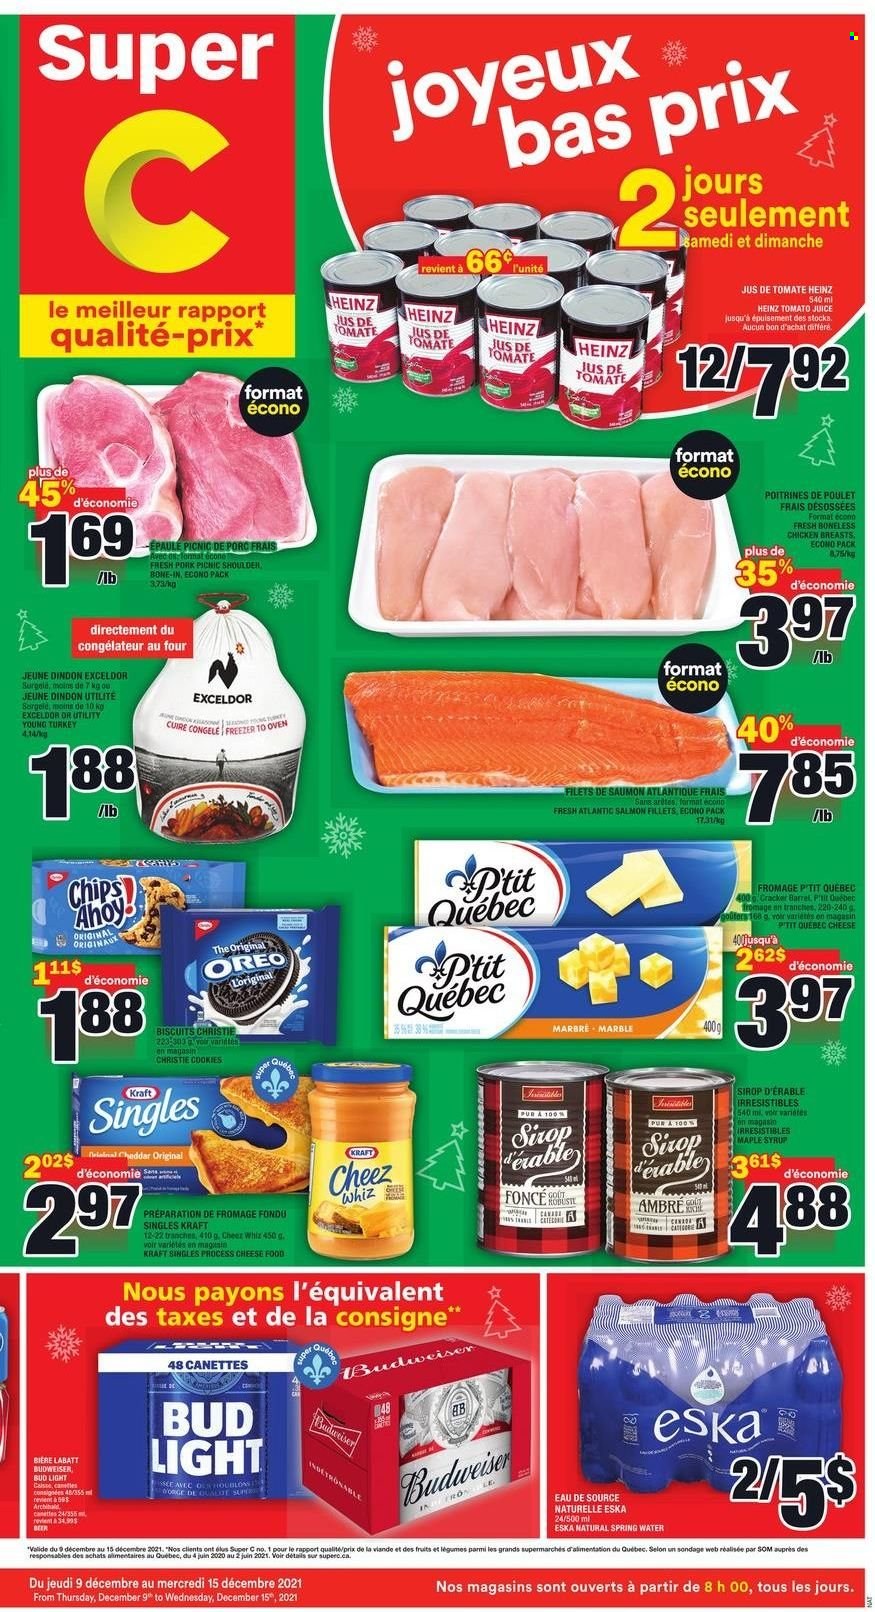 Super C Flyer - December 09, 2021 - December 15, 2021 - Sales products - salmon, salmon fillet, Kraft®, sandwich slices, cheese, Kraft Singles, cookies, crackers, Heinz, maple syrup, syrup, tomato juice, juice, spring water, beer, Bud Light, chicken breasts, Oreo, Budweiser, chips. Page 1.